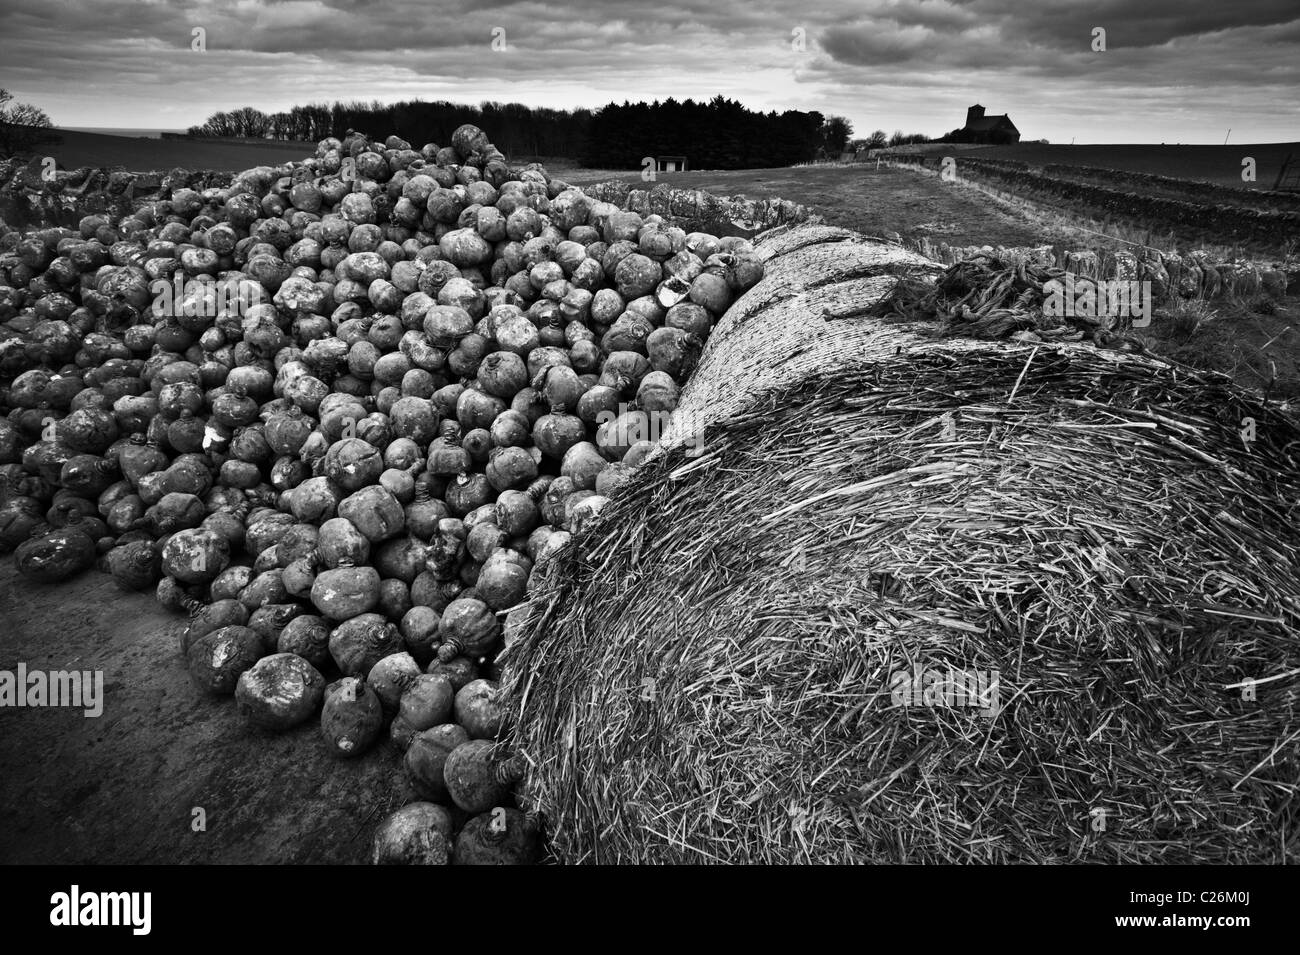 Winter feed for livestock on a farm at St Abbs, Scotland - monochrome wide-angle shot with church in distance Stock Photo